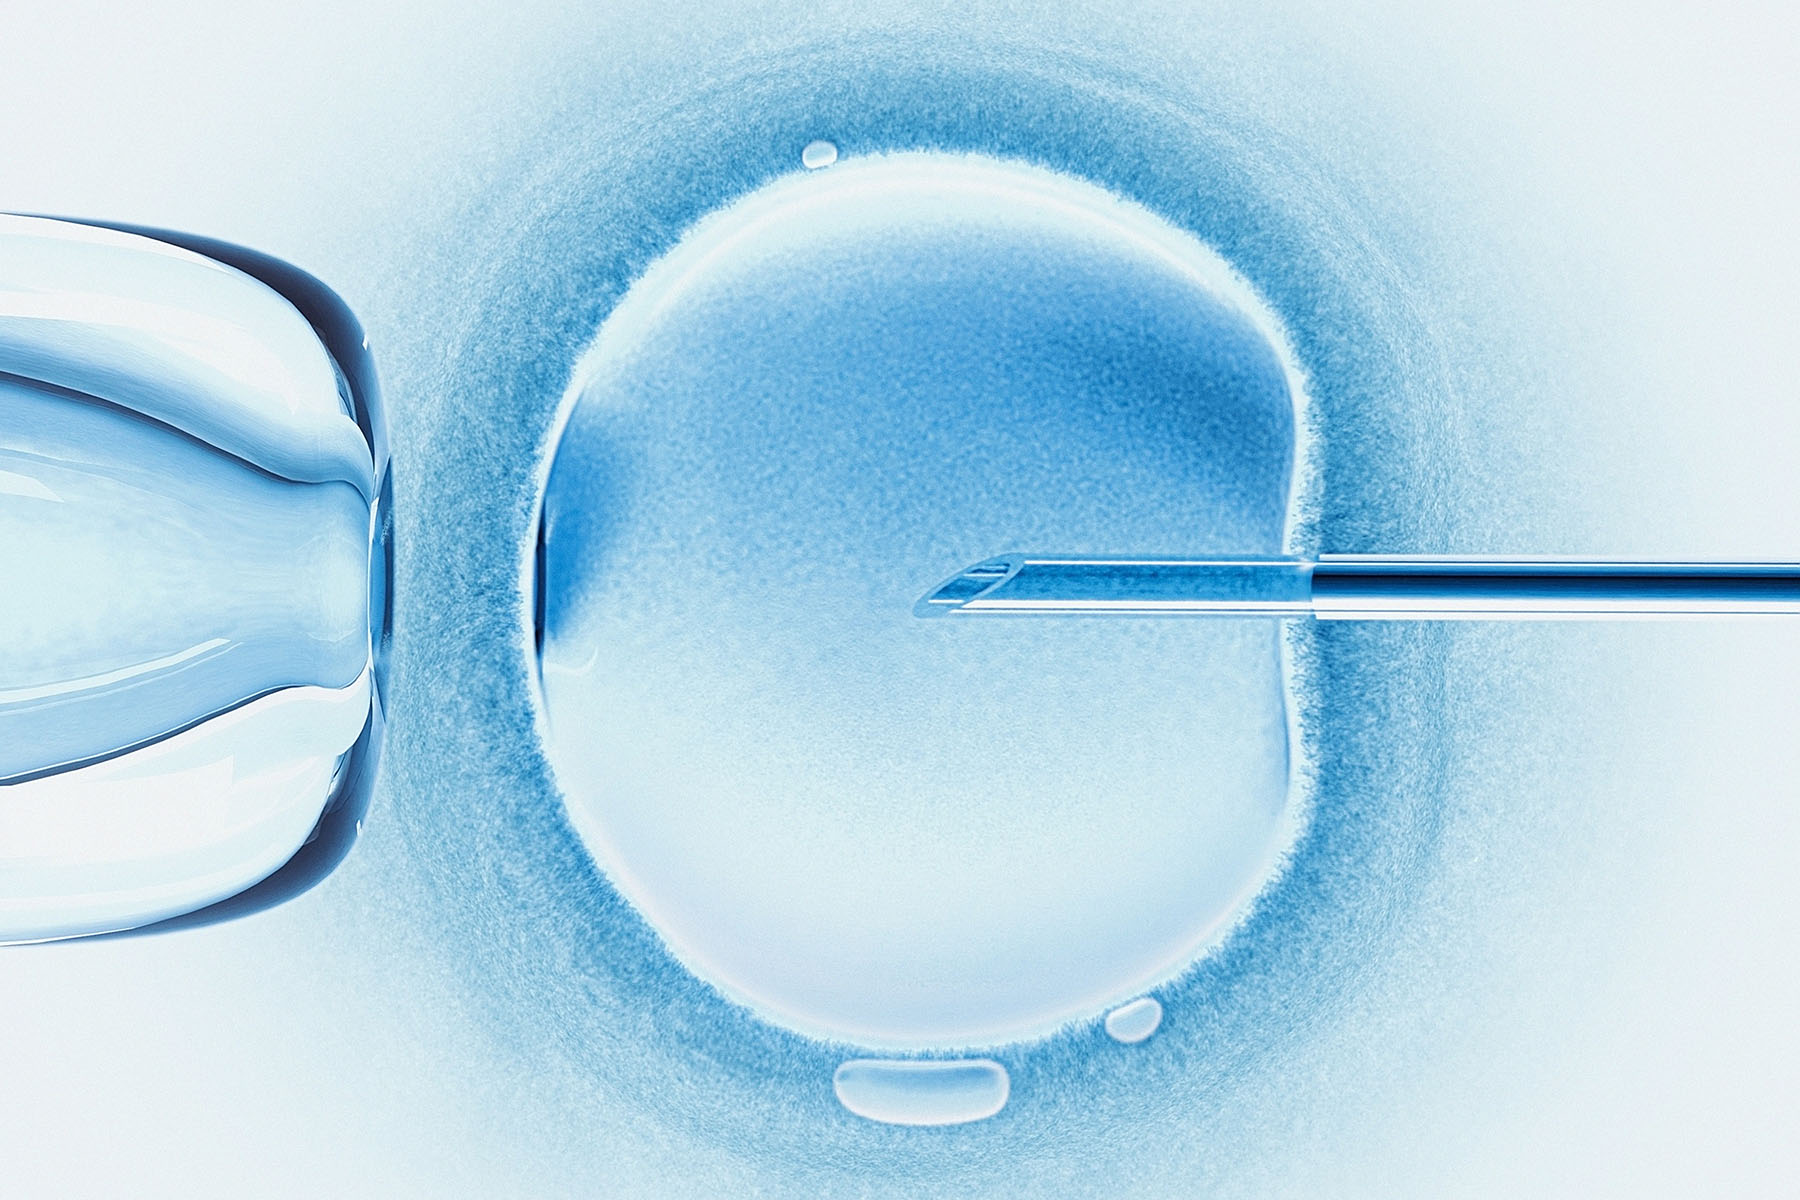 Computer image of an egg being inseminated through IVF.